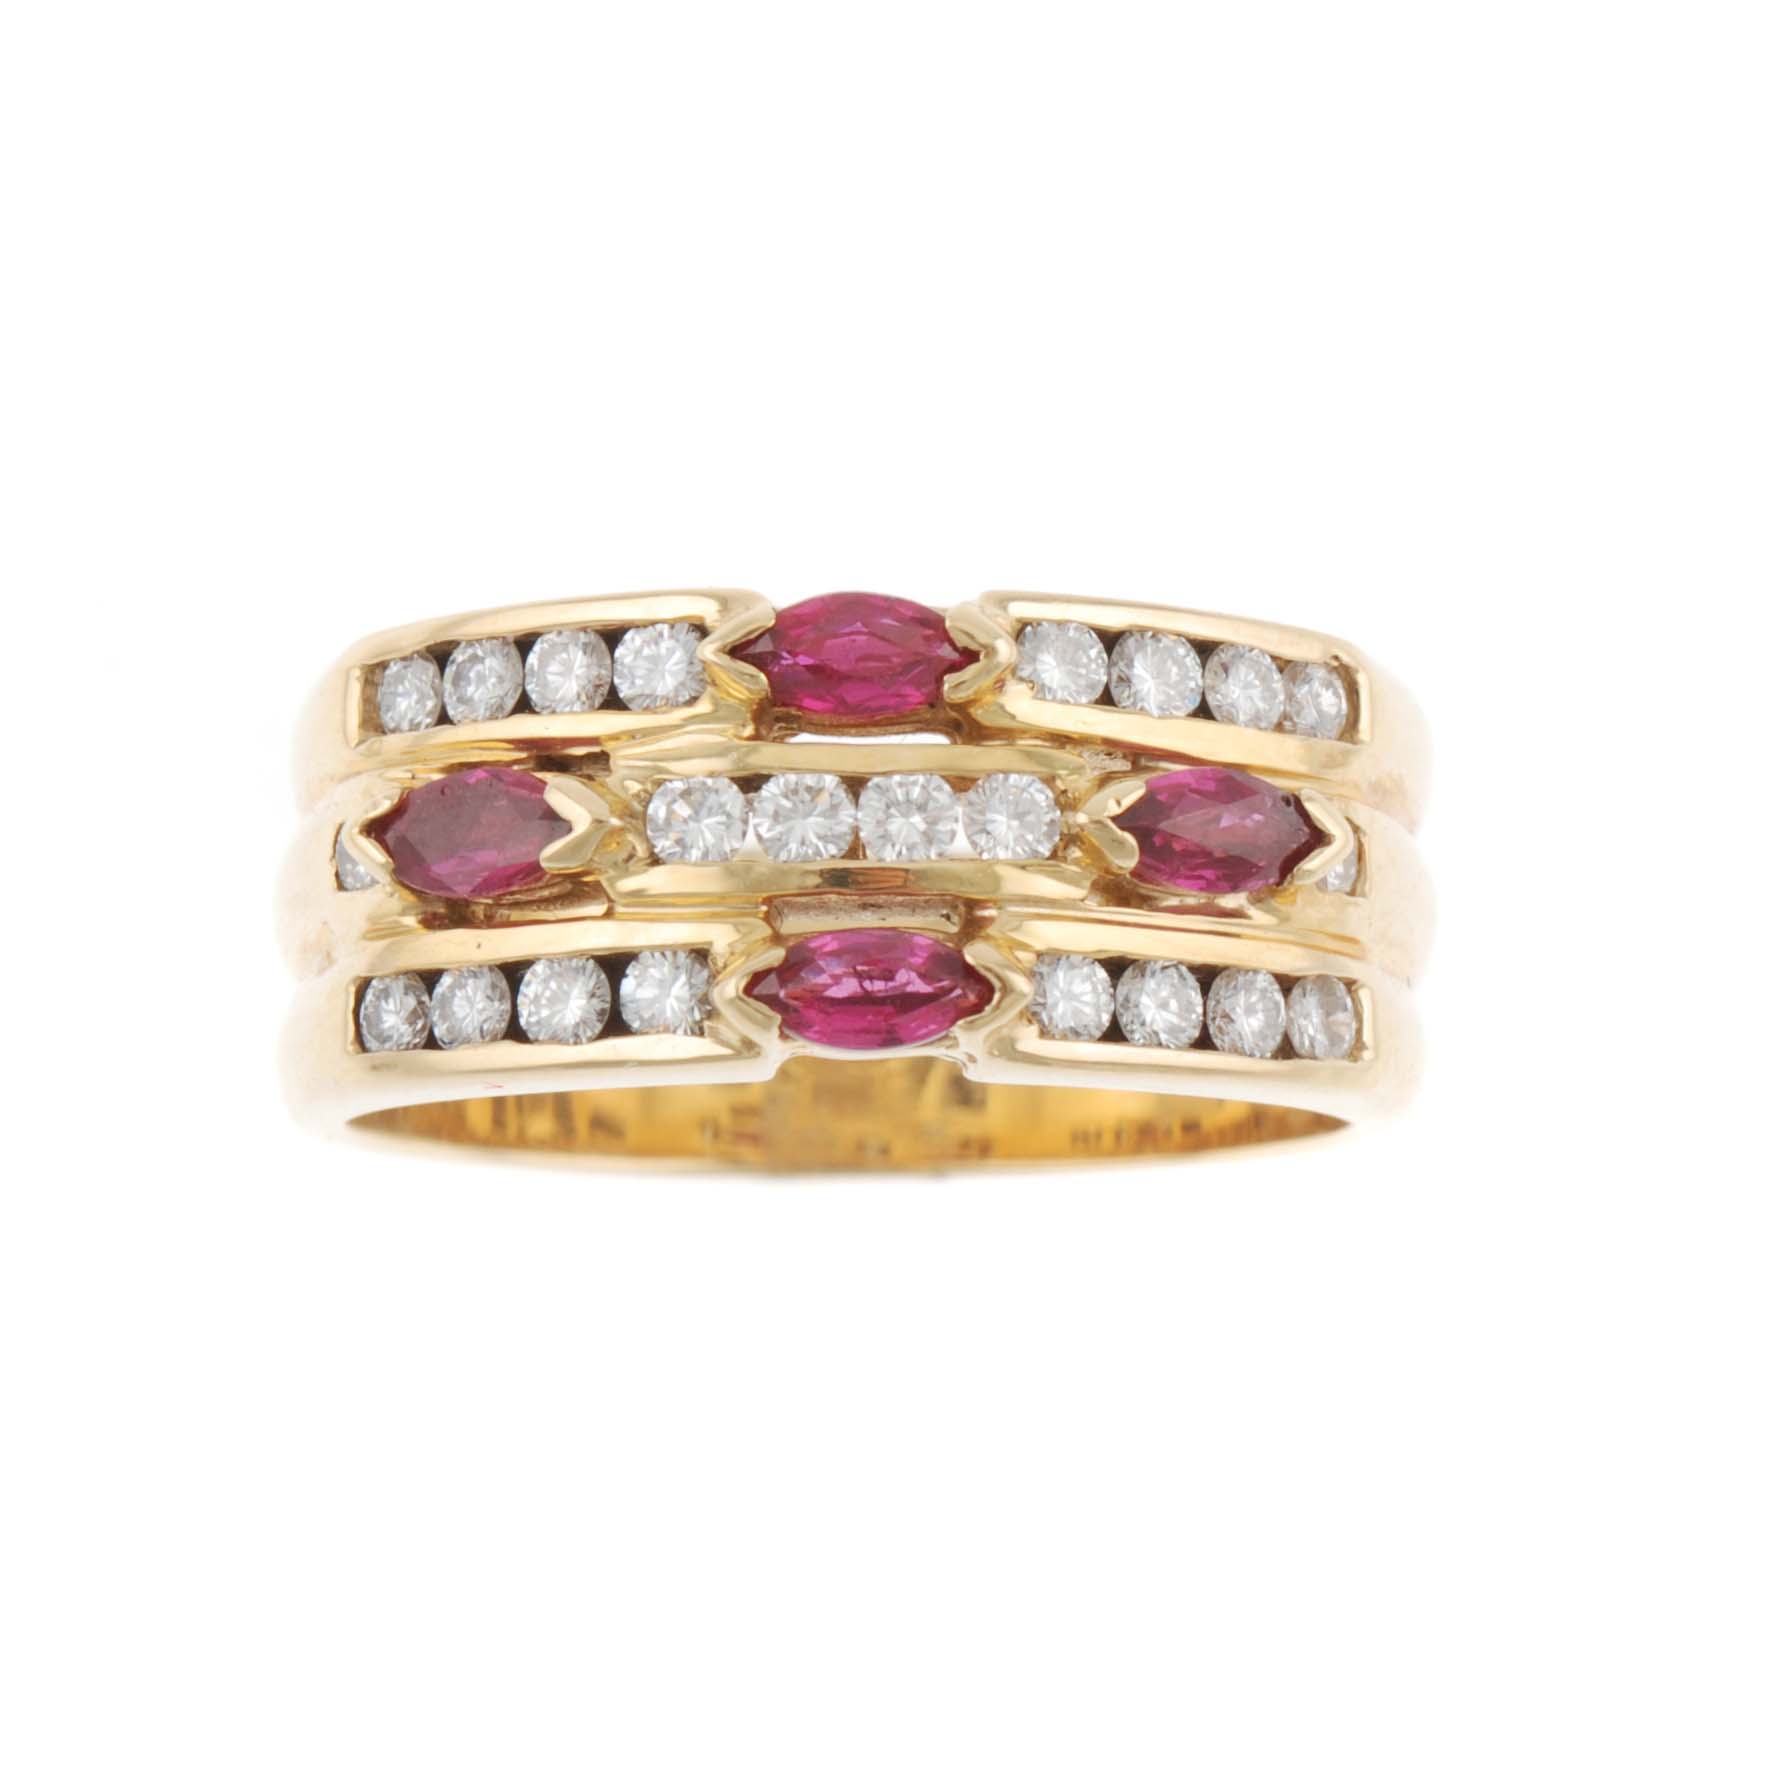 WIDE RING WITH DIAMONDS AND RUBIES.